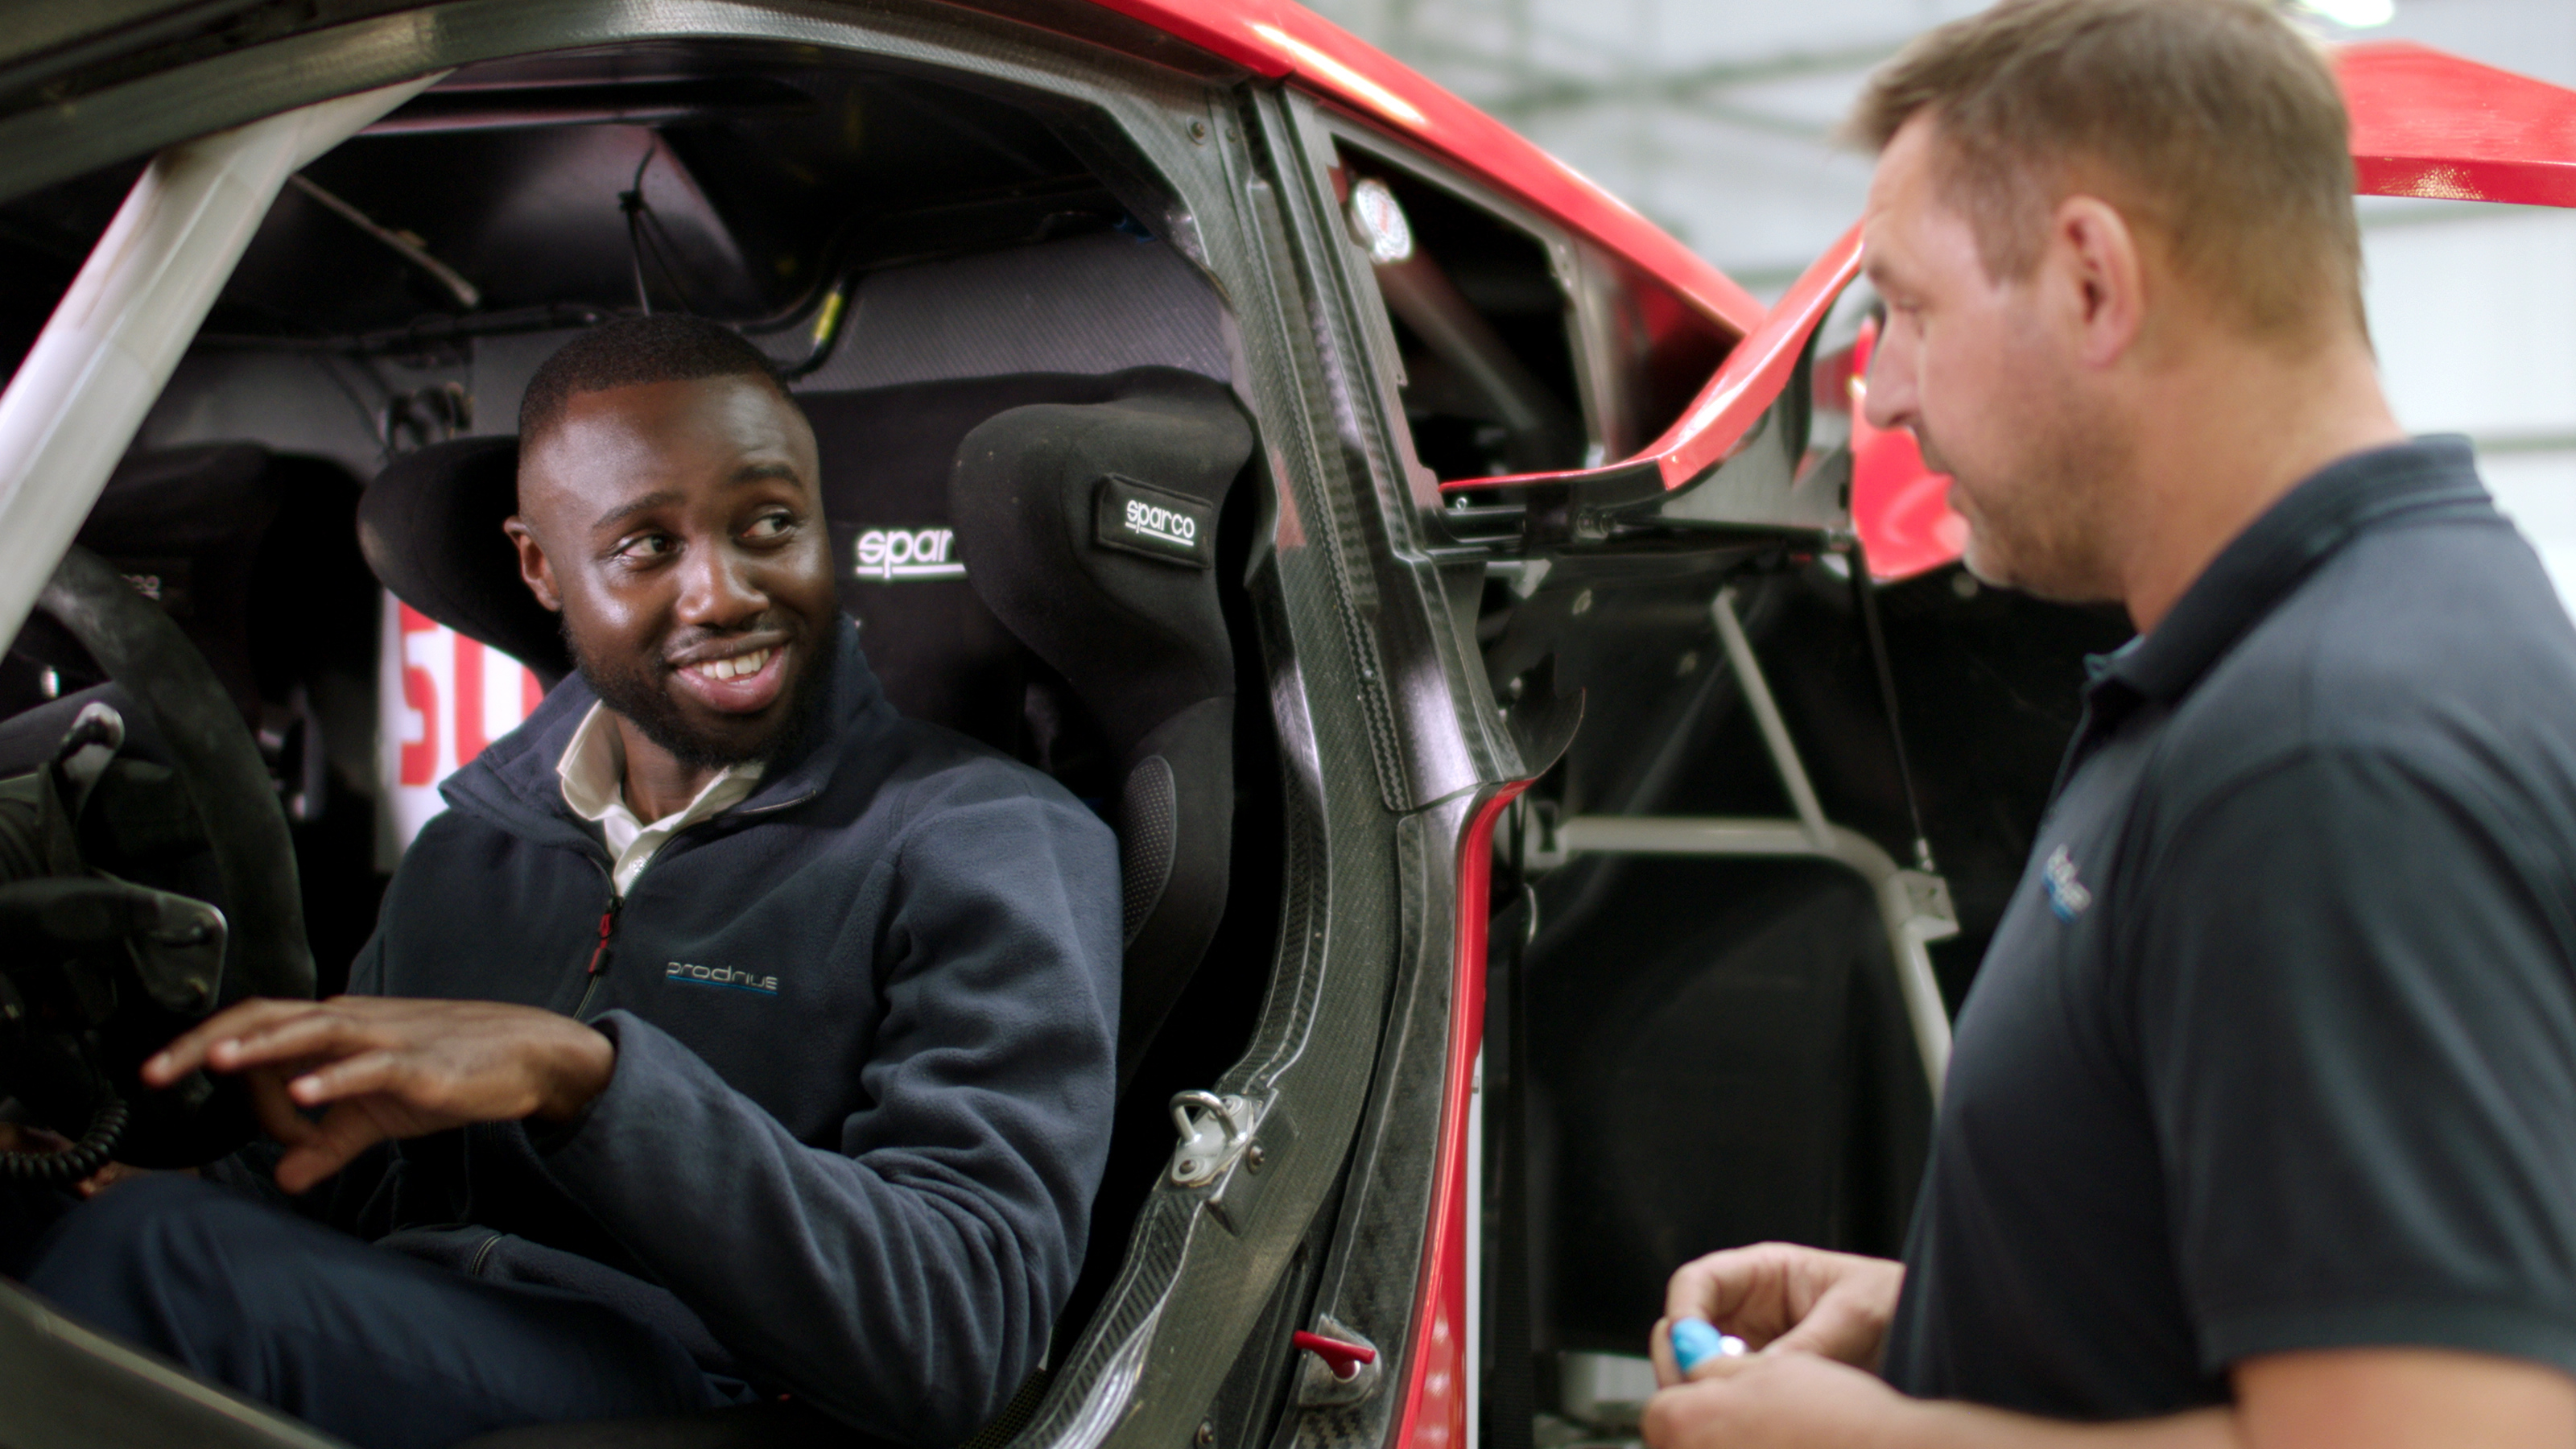 Our MSc in Motorsport Scholarship Programme aims to help more people from Black and mixed Black ethnic backgrounds study a motorsport-related subject